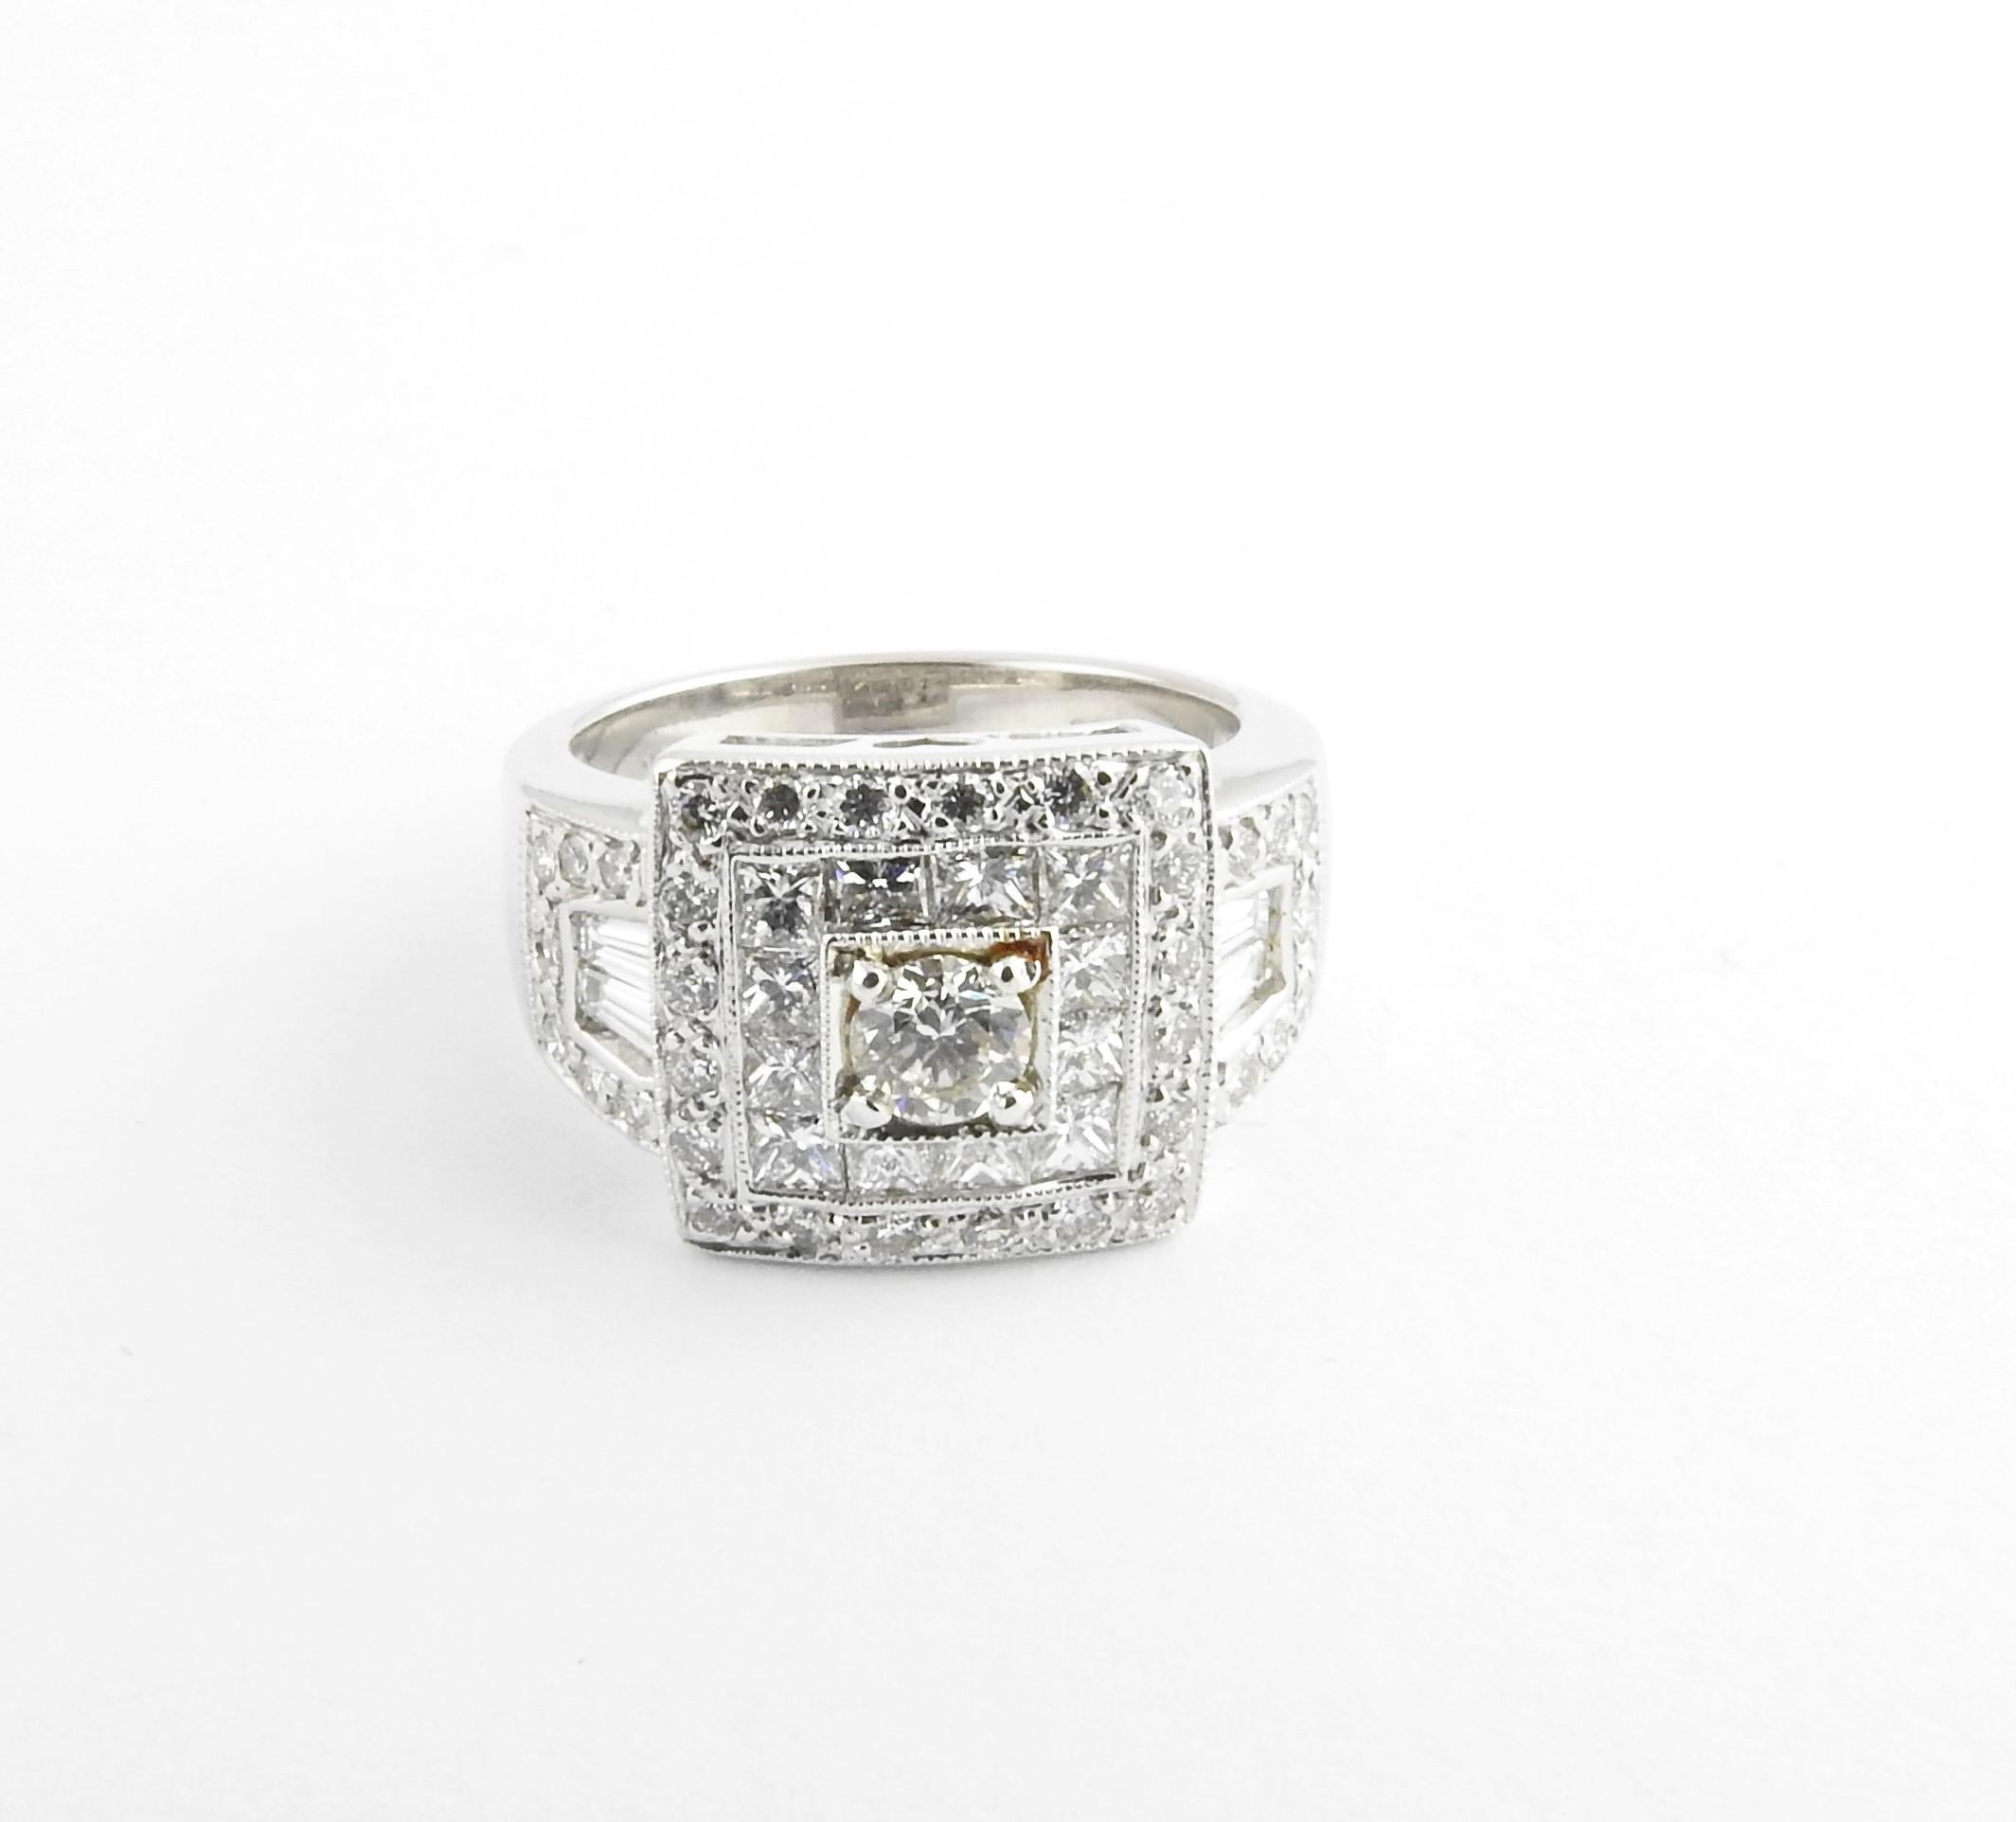 Vintage 18 Karat White Gold and Diamond Ring Size 6

This sparkling ring features 28 round brilliant cut diamonds, 12 princess cut daimonds and two baguette diamonds set in beautifully detailed 18K white gold. Width: 12 mm. Shank: 4 mm.

Approximate